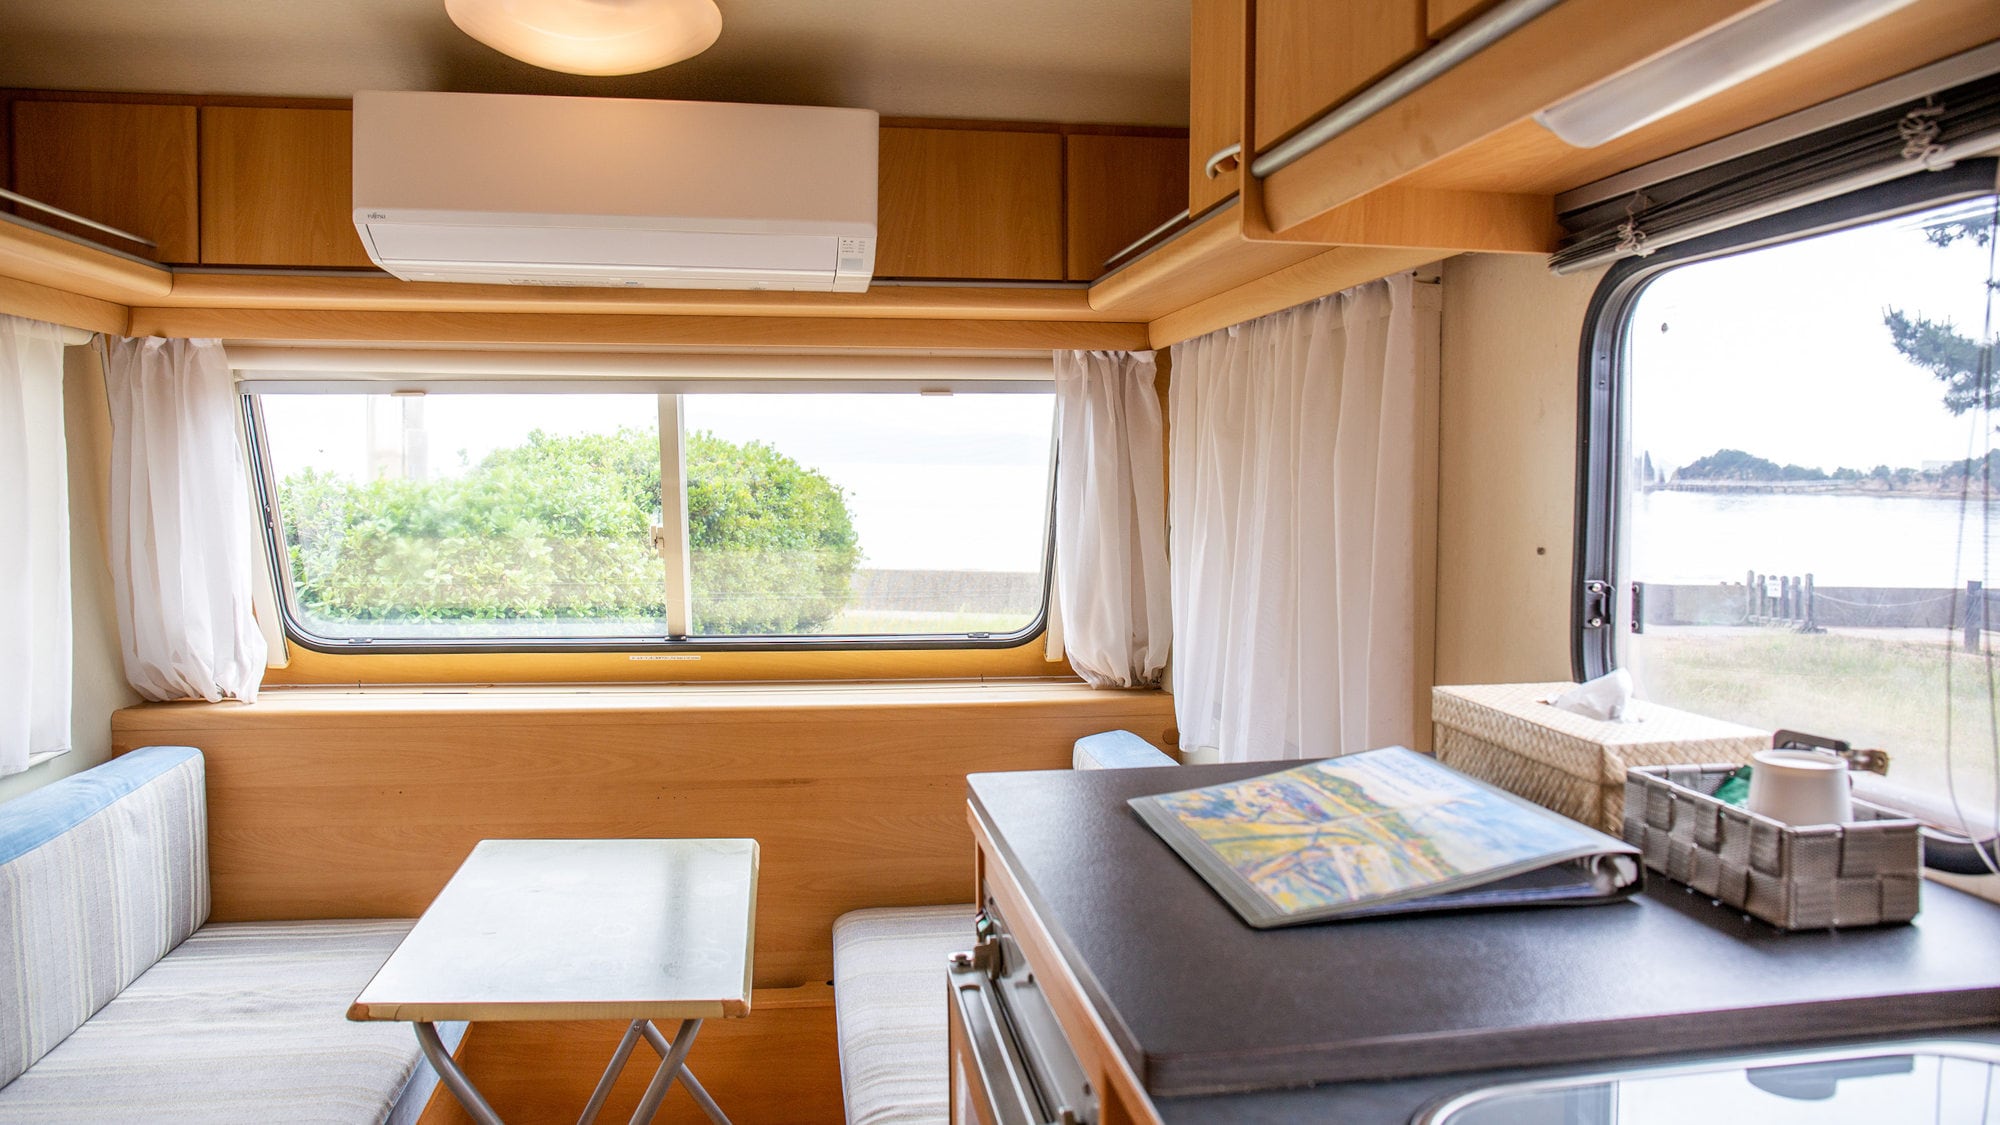 ・ [Mobile home] It is not large, but it is comfortable with air conditioning.